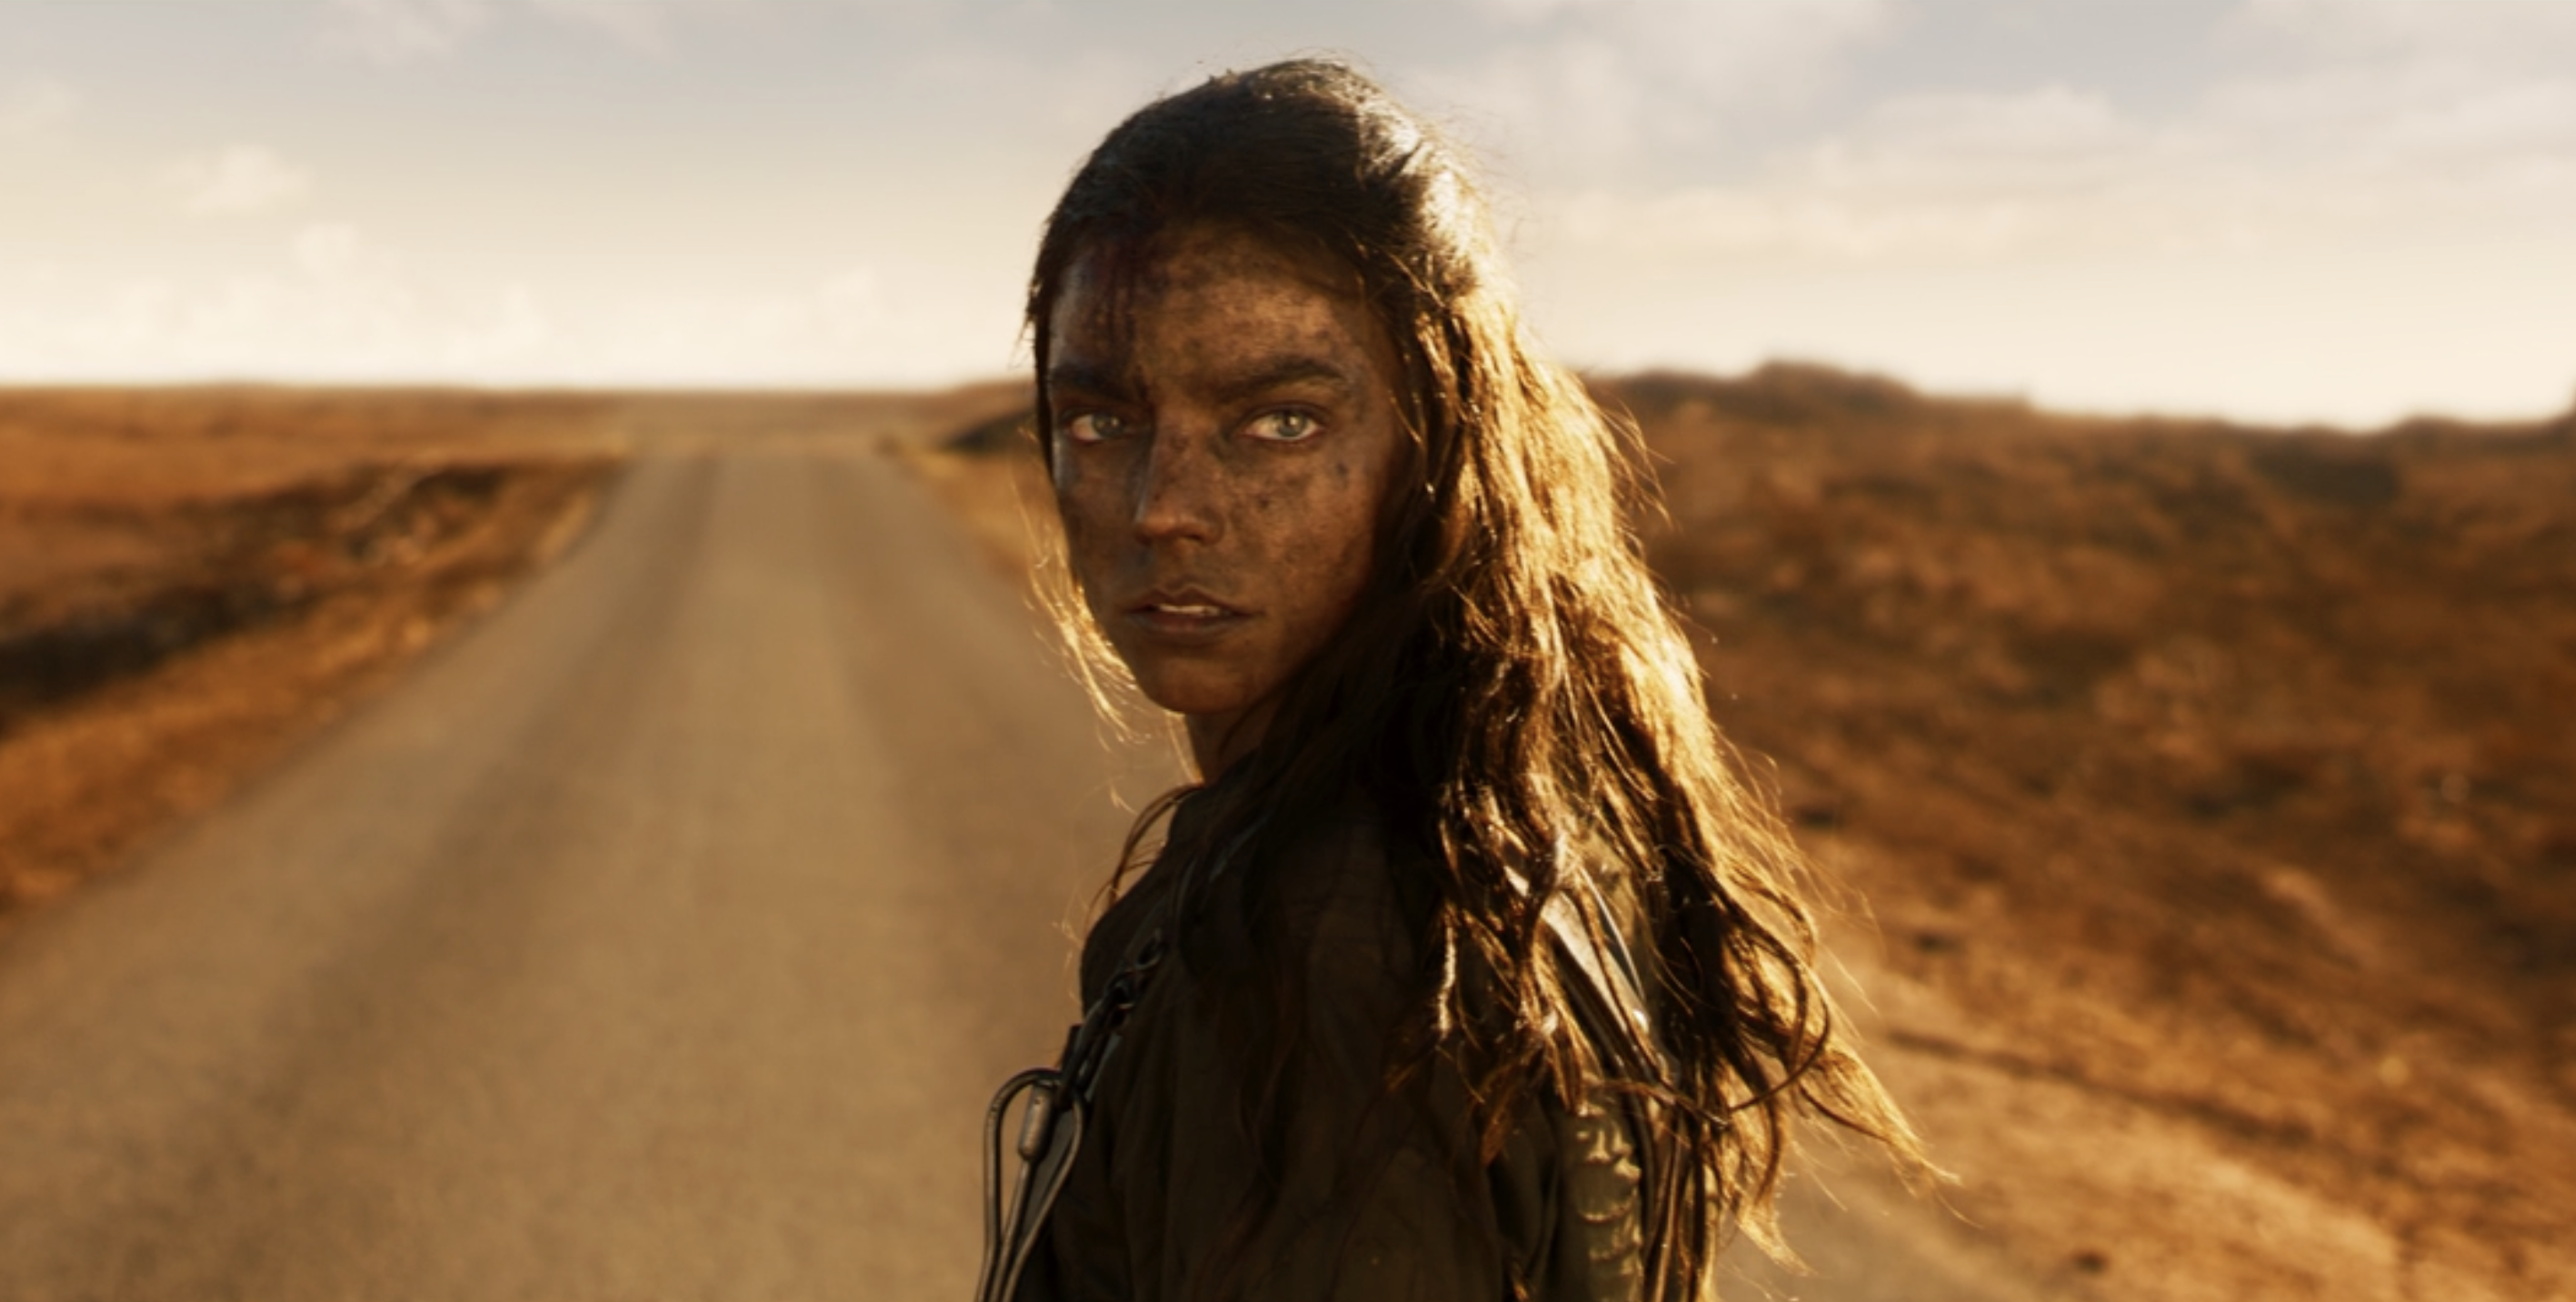 Furiosa review: Anya Taylor-Joy awes in this bold yet episodic prequel